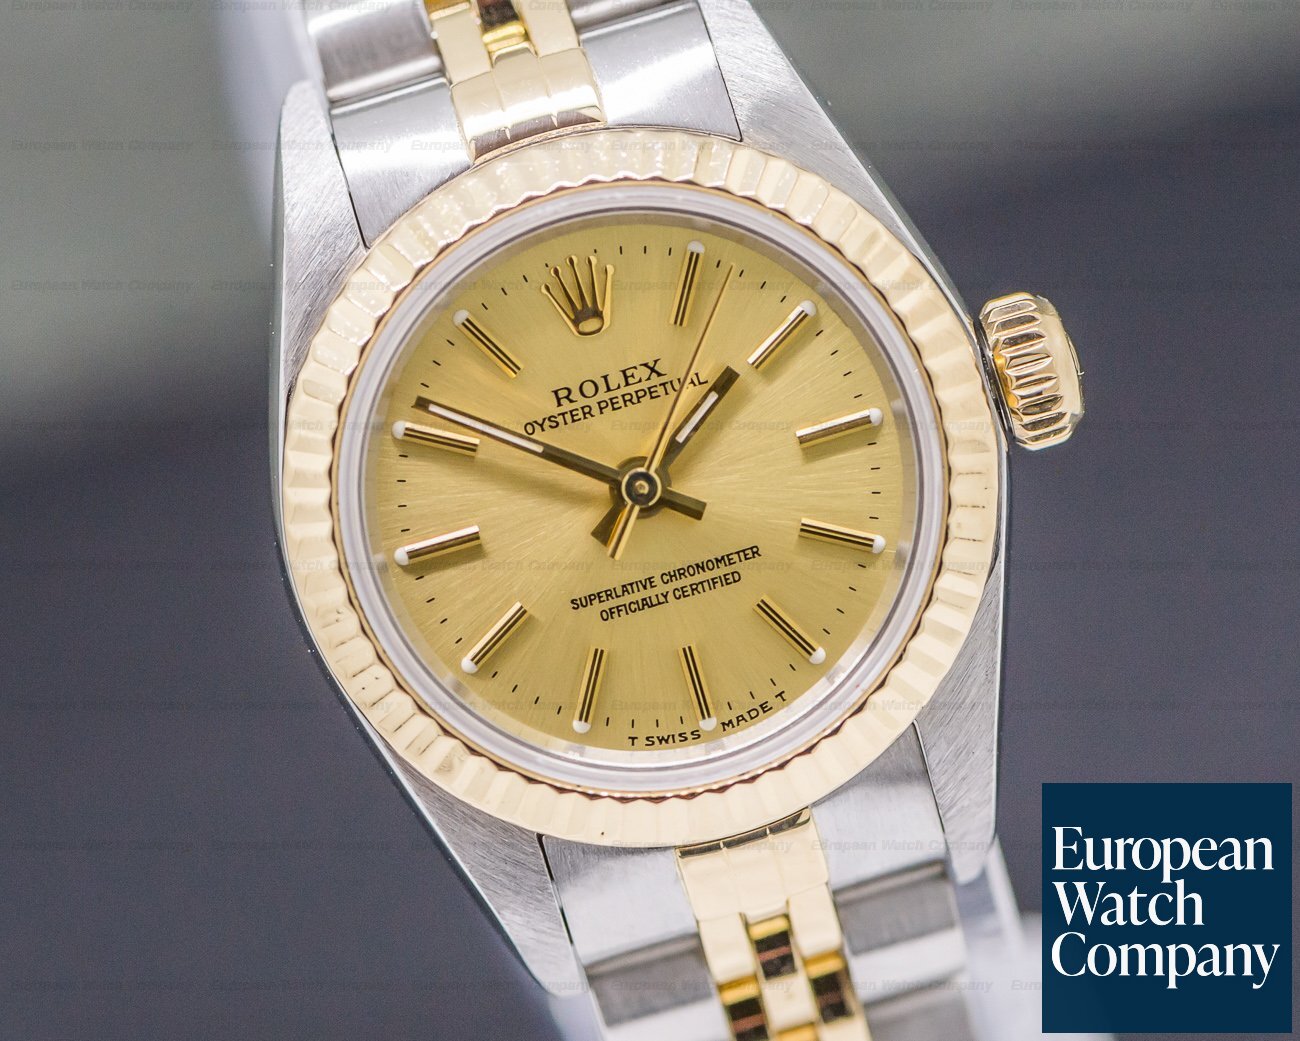 Rolex Oyster Perpetual Ladies 26MM Ref. 67193